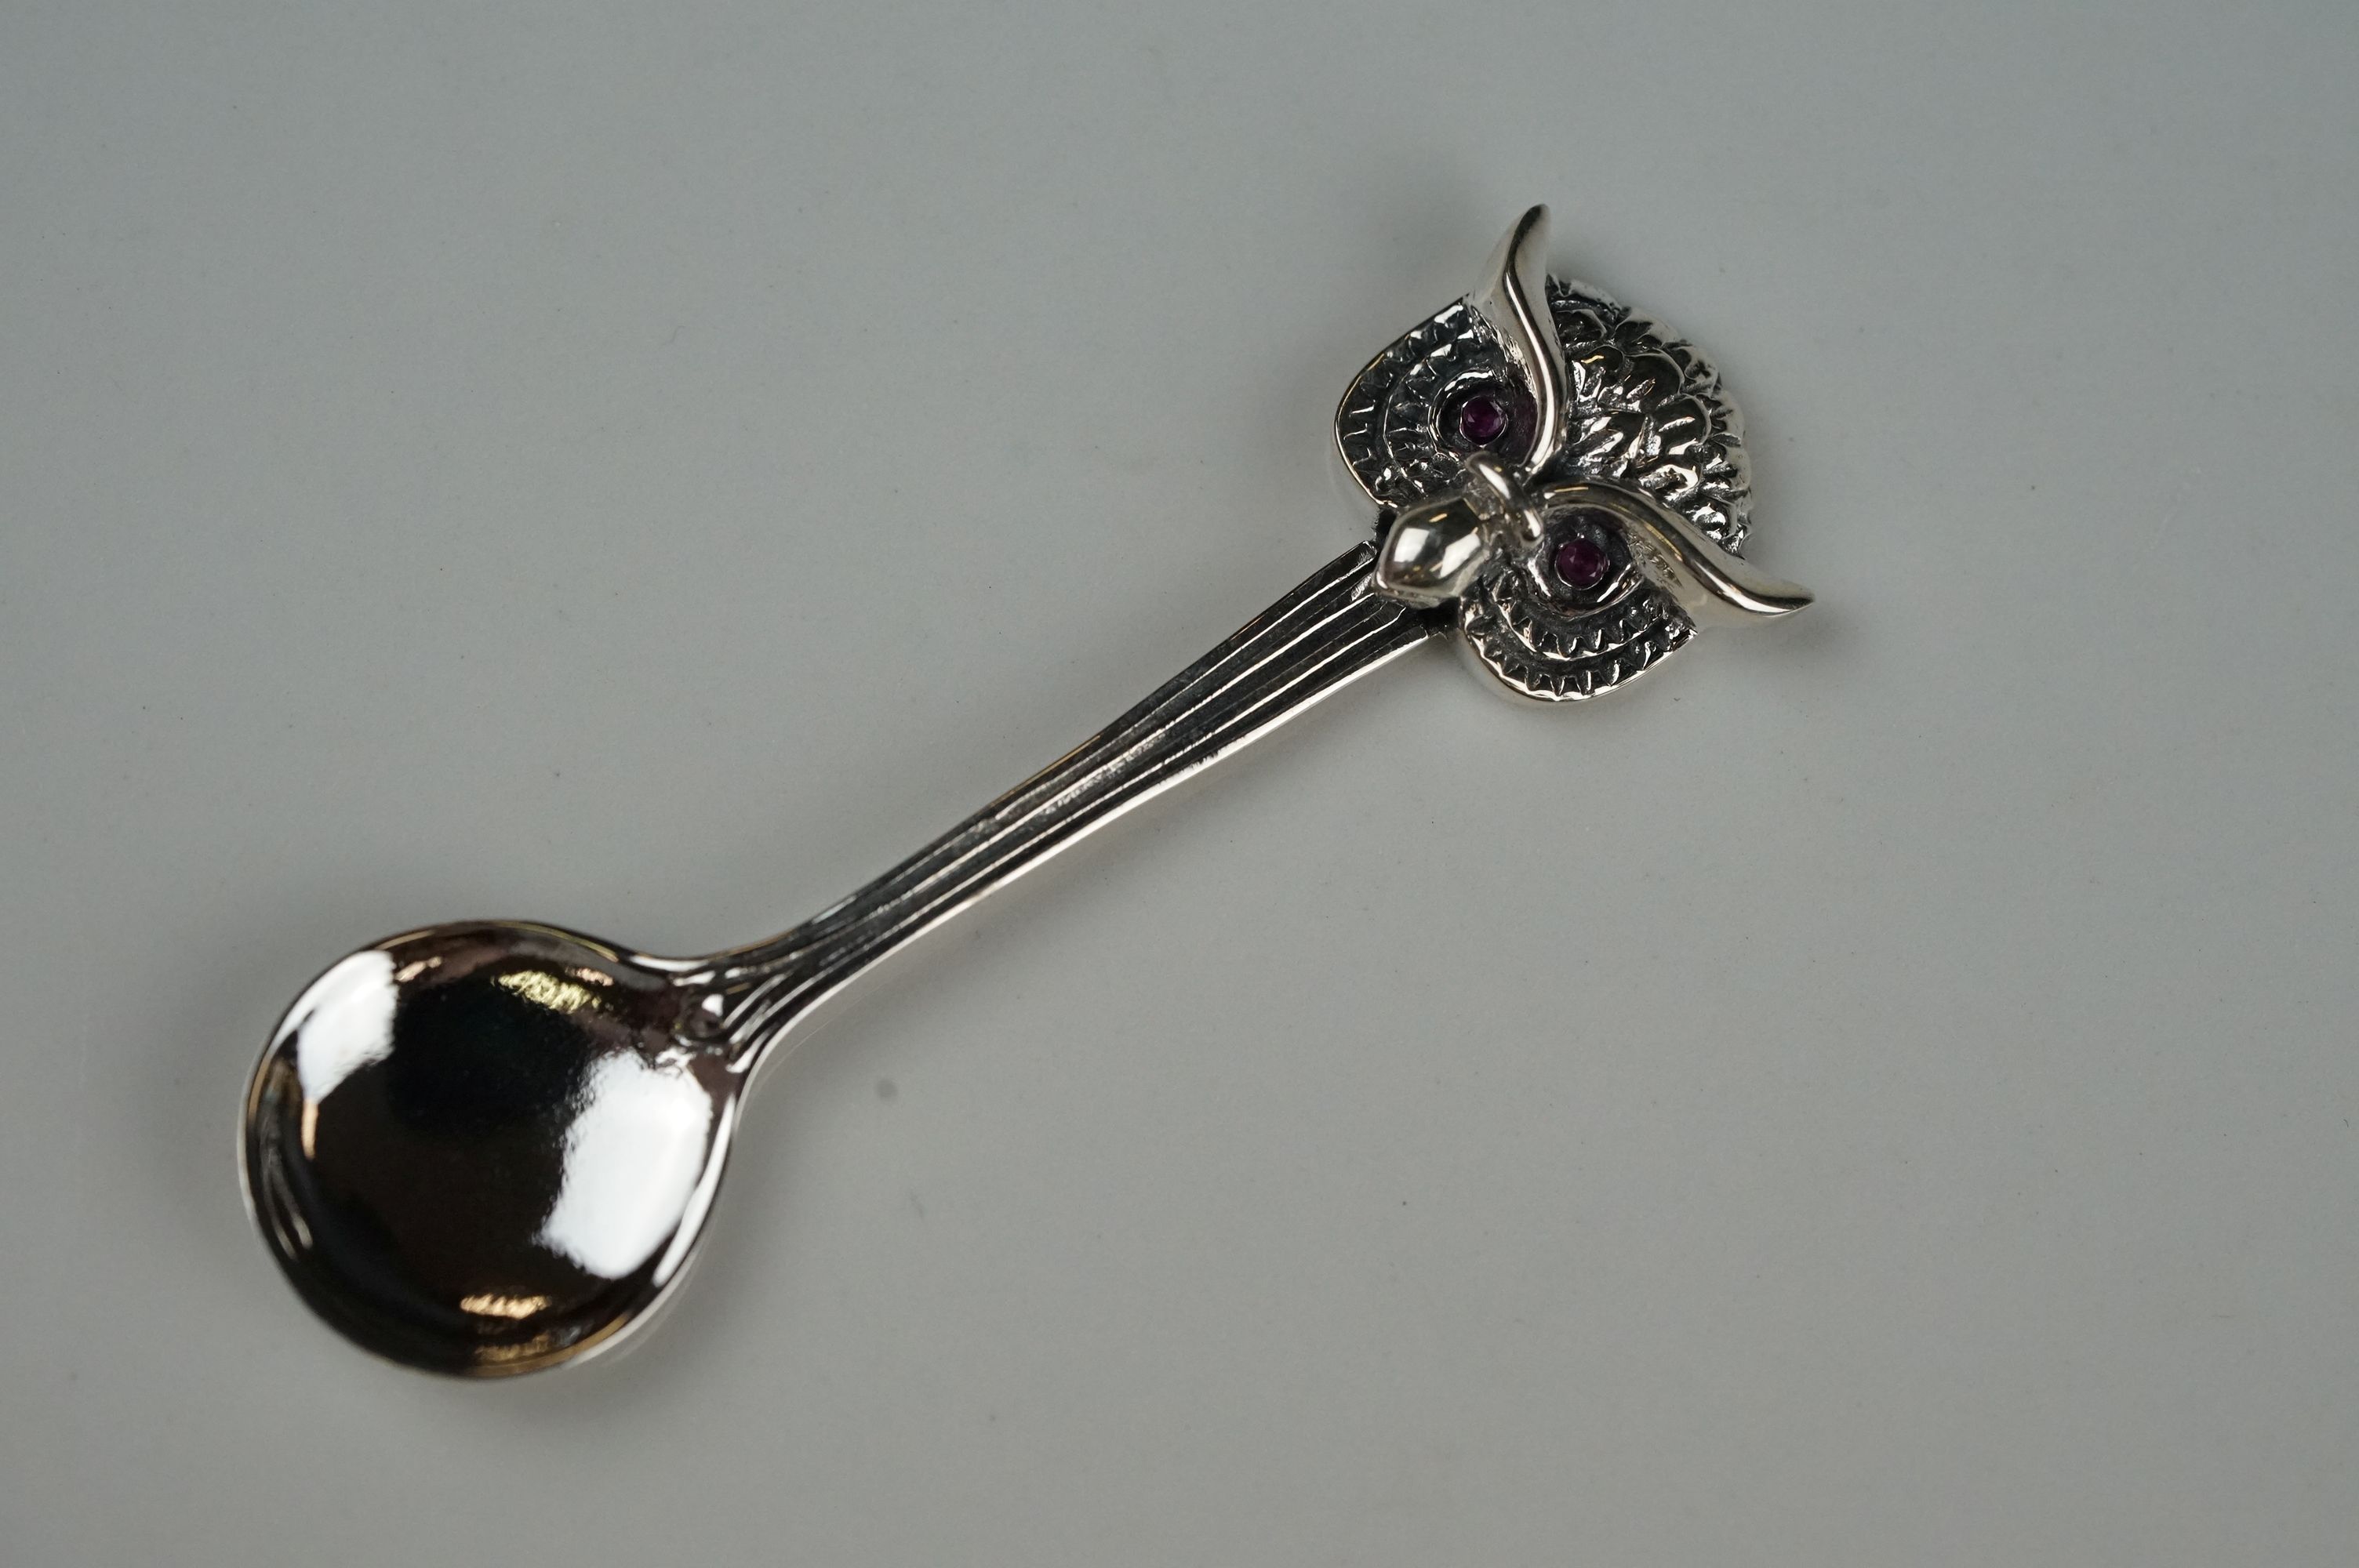 Silver salt spoon with owl finial - Image 5 of 5